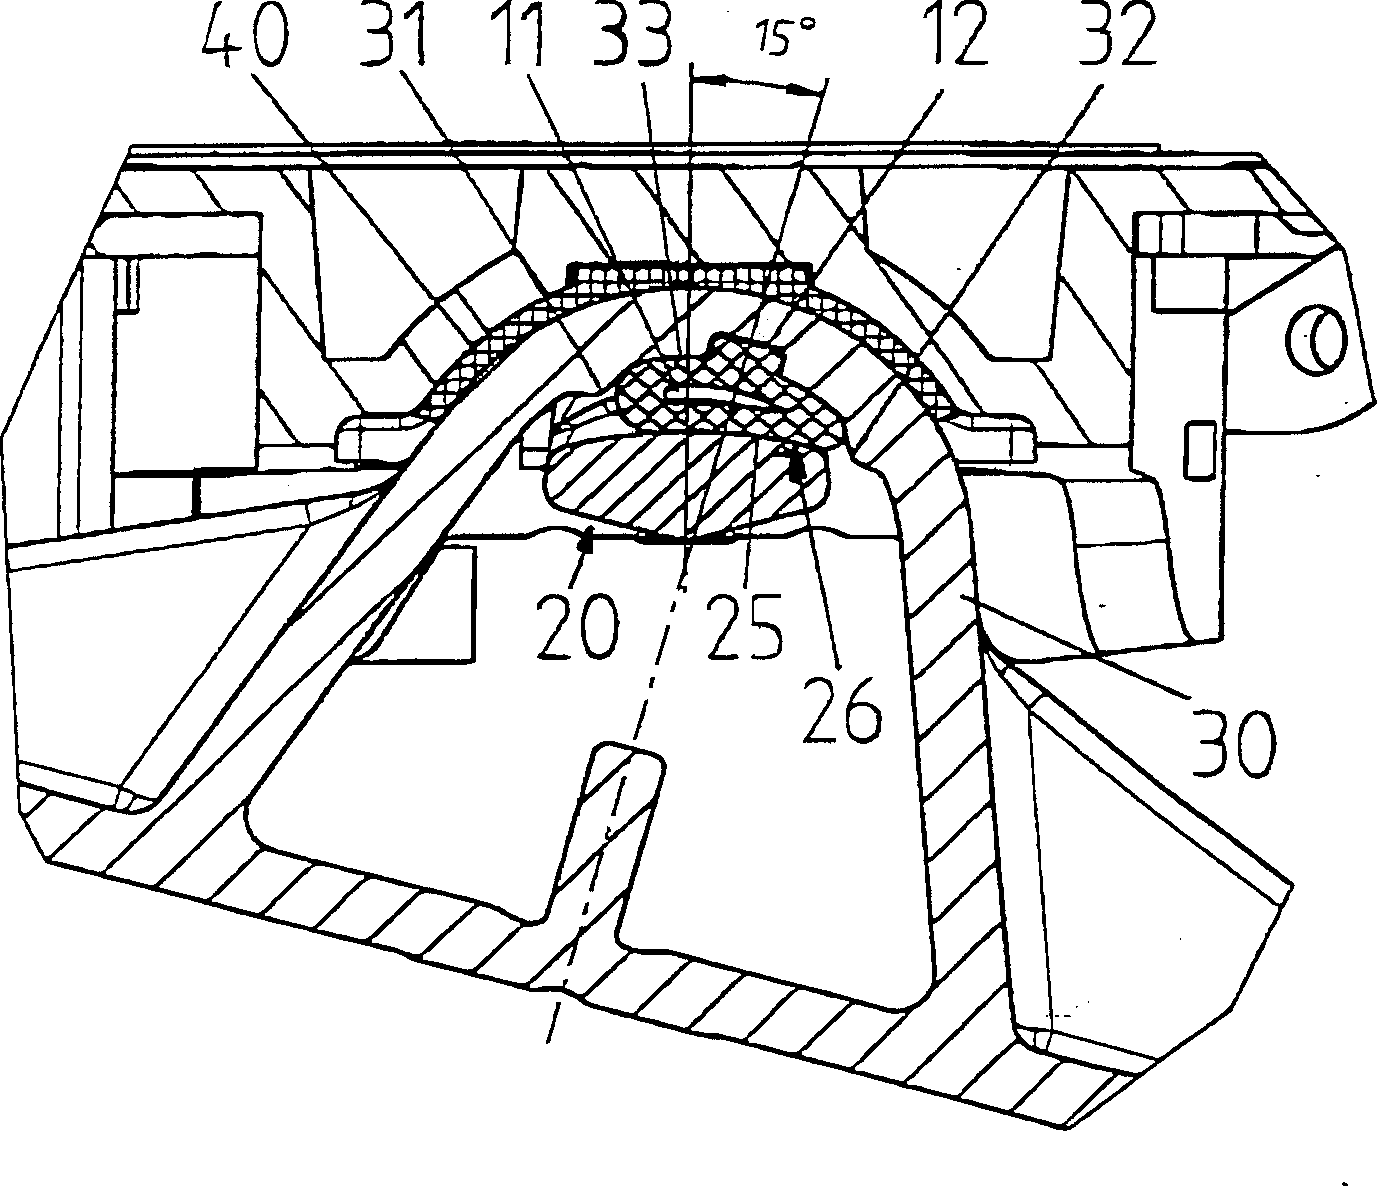 Mounting/bearing device with stirrup cradle and connecting bridge for bearing rotary disk